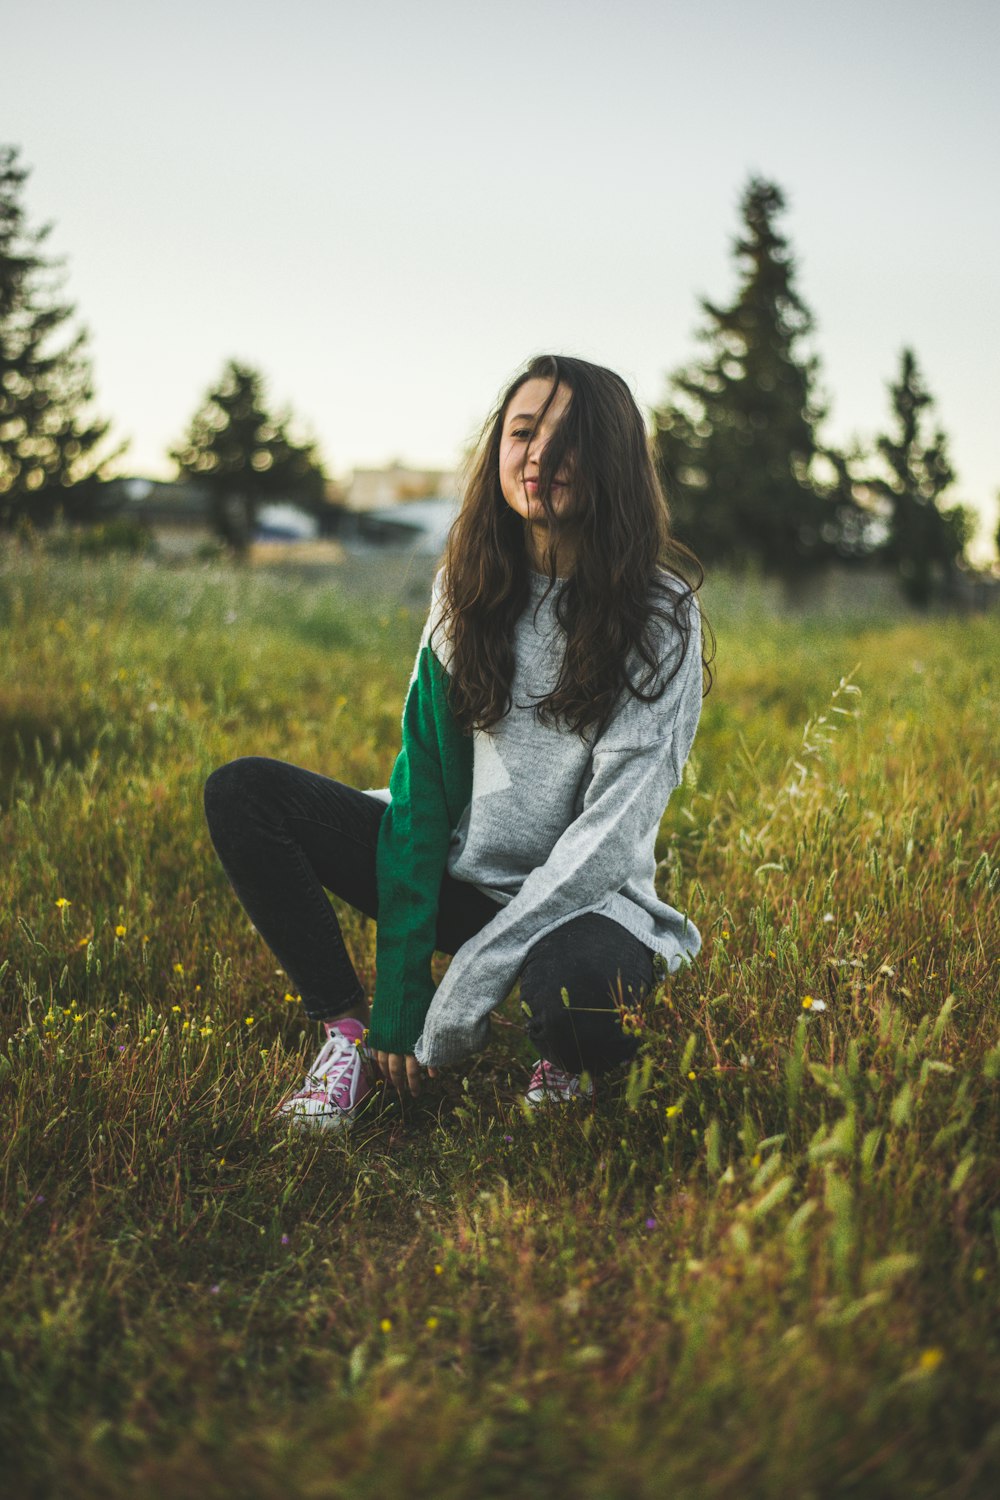 crouching woman wearing gray sweater on green grass field during daytime